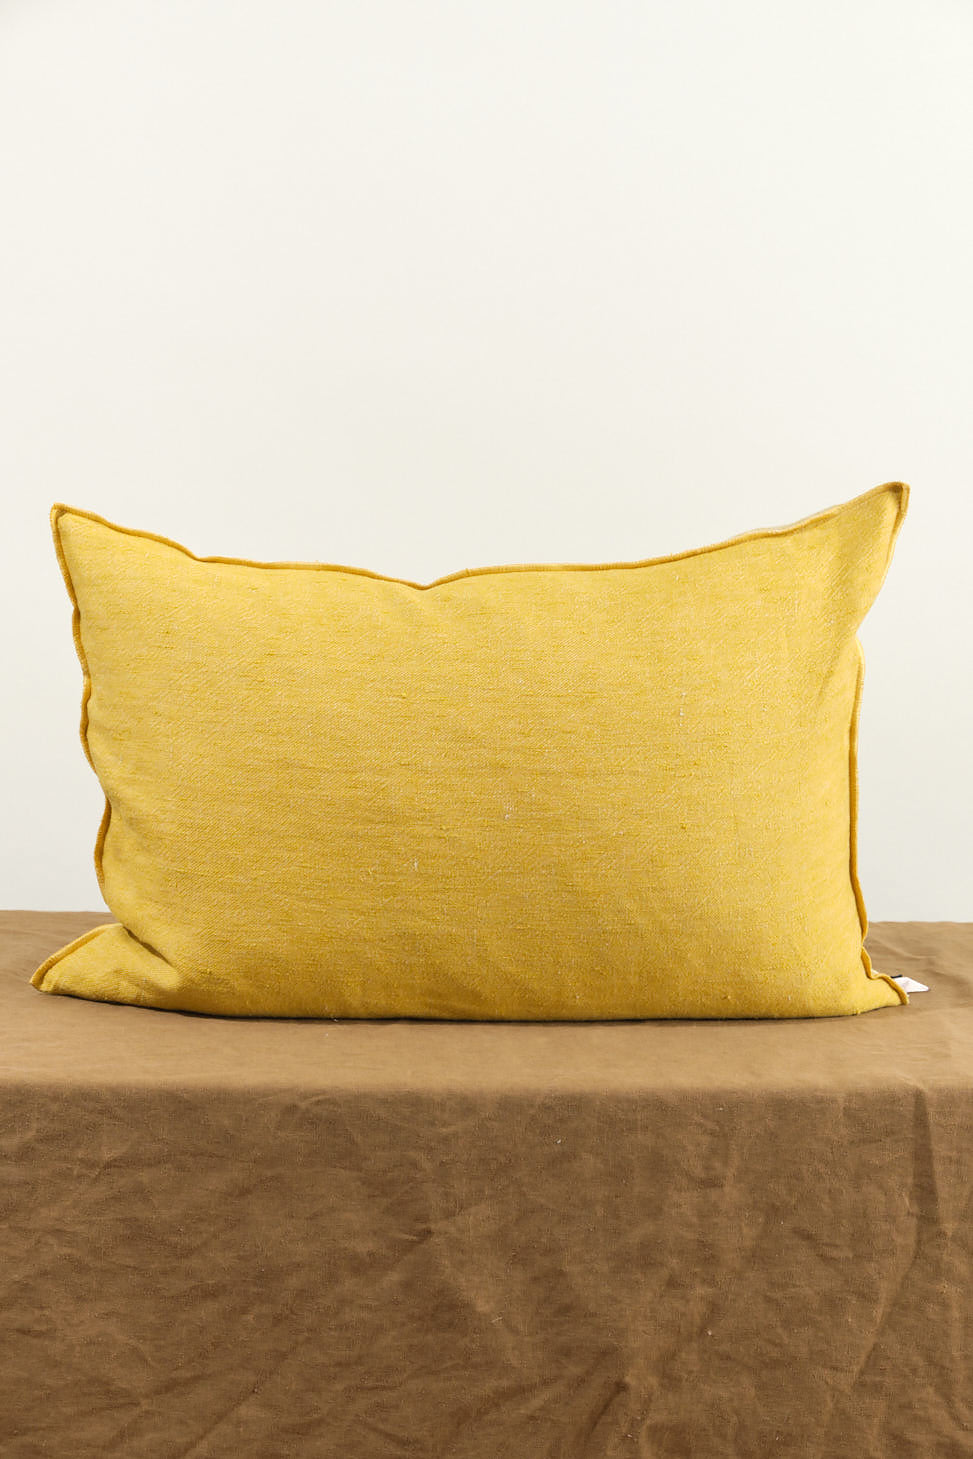 16" X 24" Washed Linen Vise Versa Cushion in Ocre